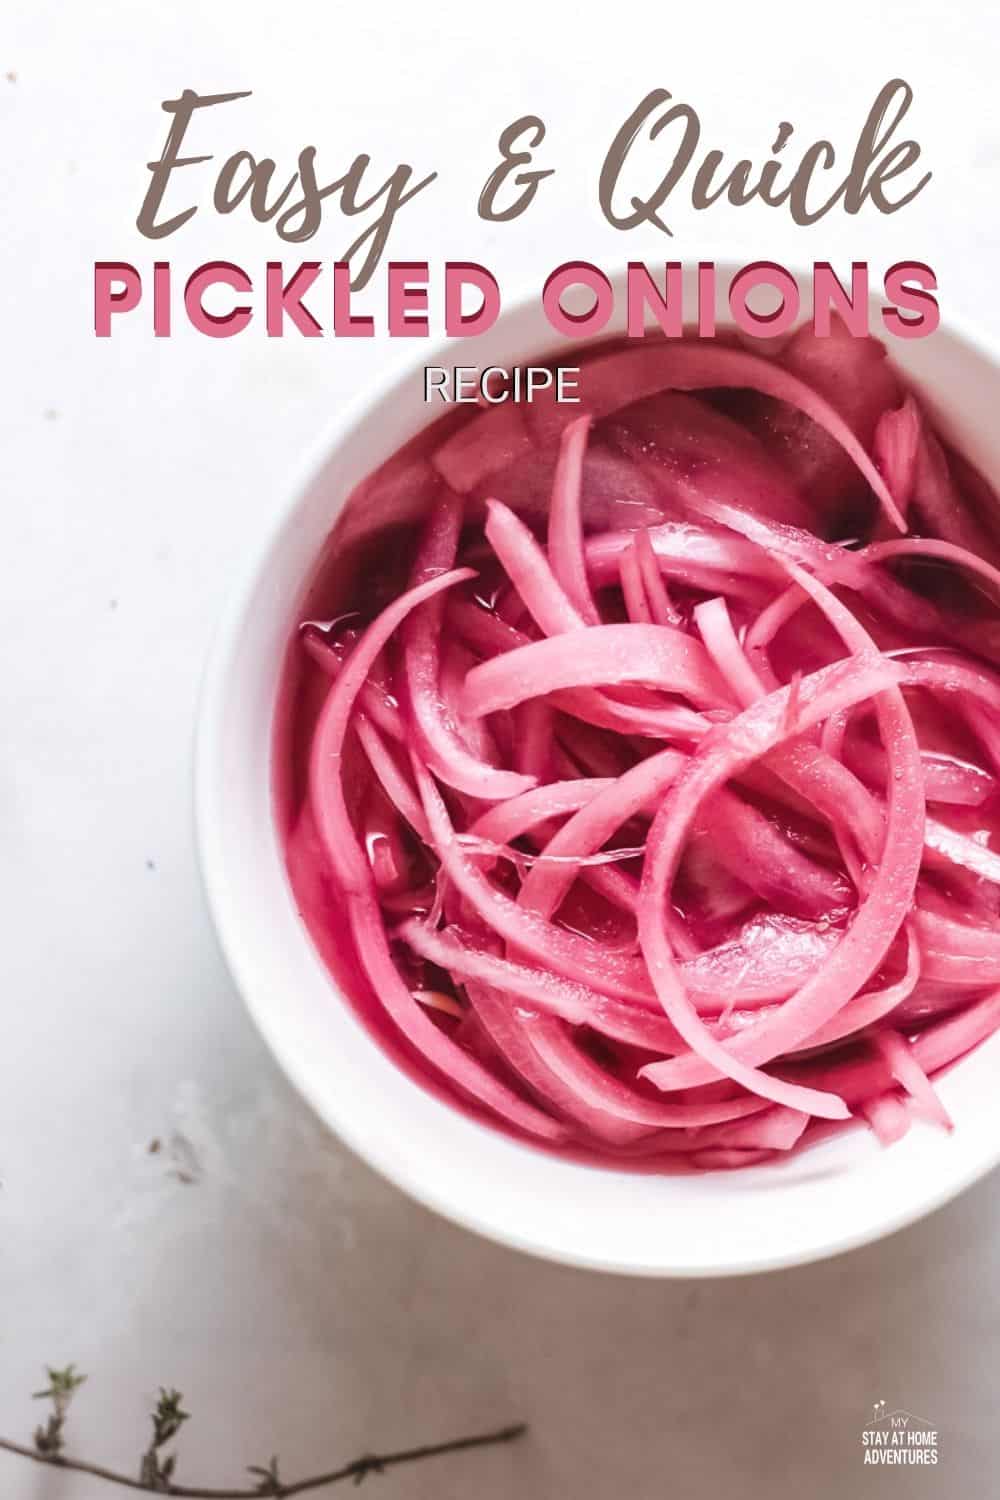 Pickled red onions are such a wonderful condiment. They can be used on sandwiches, tacos, and burgers or as a topping on side dishes. via @mystayathome